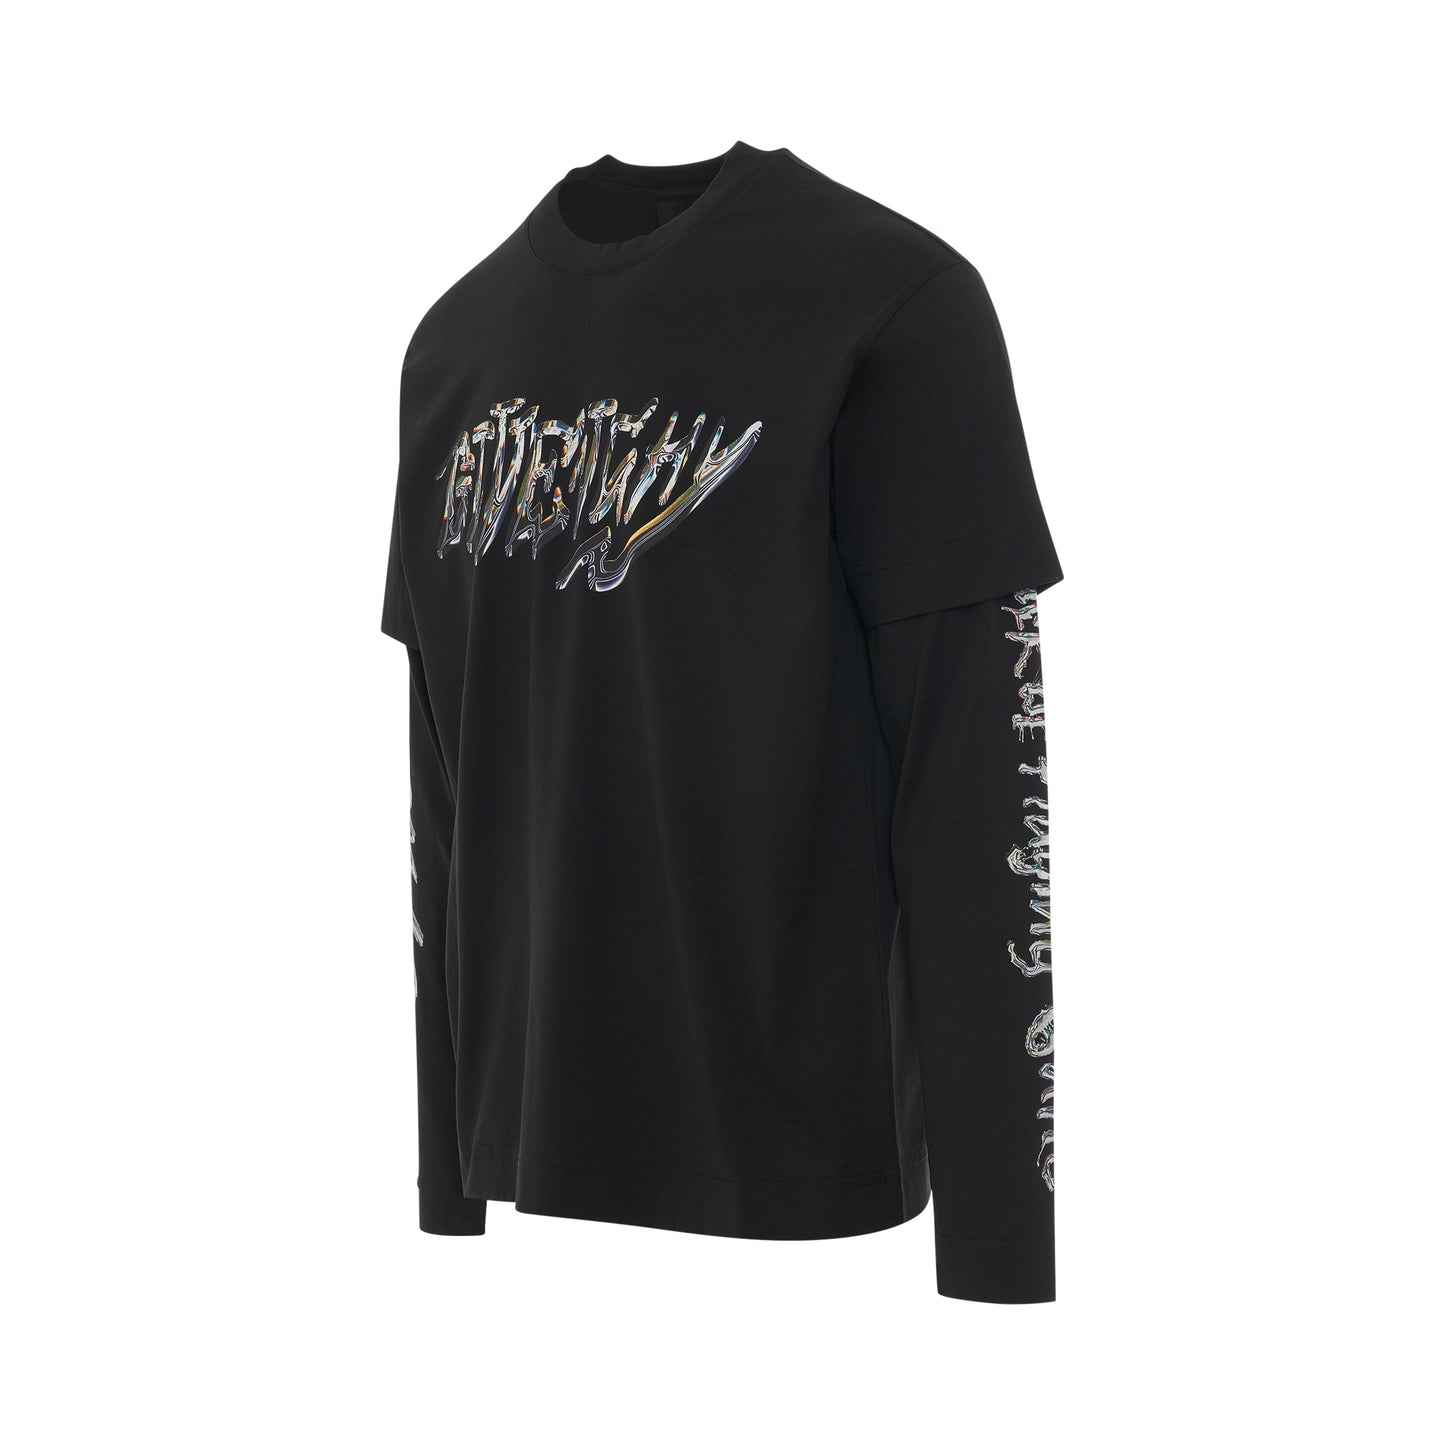 BSTROY 4G T-Shirt in Black